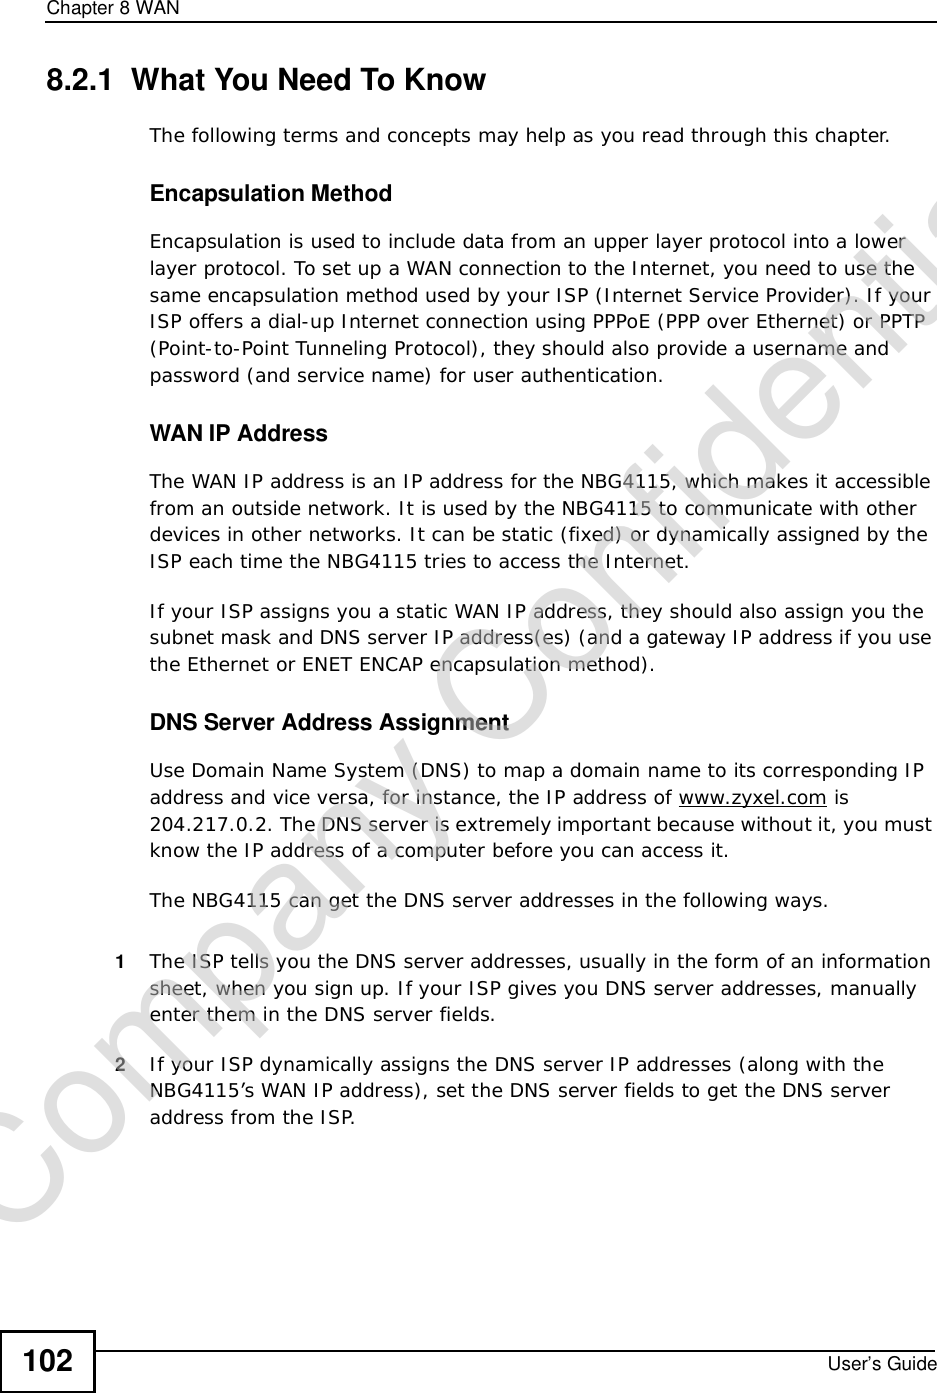 Chapter 8WANUser’s Guide1028.2.1  What You Need To KnowThe following terms and concepts may help as you read through this chapter.Encapsulation MethodEncapsulation is used to include data from an upper layer protocol into a lower layer protocol. To set up a WAN connection to the Internet, you need to use the same encapsulation method used by your ISP (Internet Service Provider). If your ISP offers a dial-up Internet connection using PPPoE (PPP over Ethernet) or PPTP (Point-to-Point Tunneling Protocol), they should also provide a username and password (and service name) for user authentication.WAN IP AddressThe WAN IP address is an IP address for the NBG4115, which makes it accessible from an outside network. It is used by the NBG4115 to communicate with other devices in other networks. It can be static (fixed) or dynamically assigned by the ISP each time the NBG4115 tries to access the Internet.If your ISP assigns you a static WAN IP address, they should also assign you the subnet mask and DNS server IP address(es) (and a gateway IP address if you use the Ethernet or ENET ENCAP encapsulation method).DNS Server Address AssignmentUse Domain Name System (DNS) to map a domain name to its corresponding IP address and vice versa, for instance, the IP address of www.zyxel.com is 204.217.0.2. The DNS server is extremely important because without it, you must know the IP address of a computer before you can access it. The NBG4115 can get the DNS server addresses in the following ways.1The ISP tells you the DNS server addresses, usually in the form of an information sheet, when you sign up. If your ISP gives you DNS server addresses, manually enter them in the DNS server fields.2If your ISP dynamically assigns the DNS server IP addresses (along with the NBG4115’s WAN IP address), set the DNS server fields to get the DNS server address from the ISP. Company Confidential